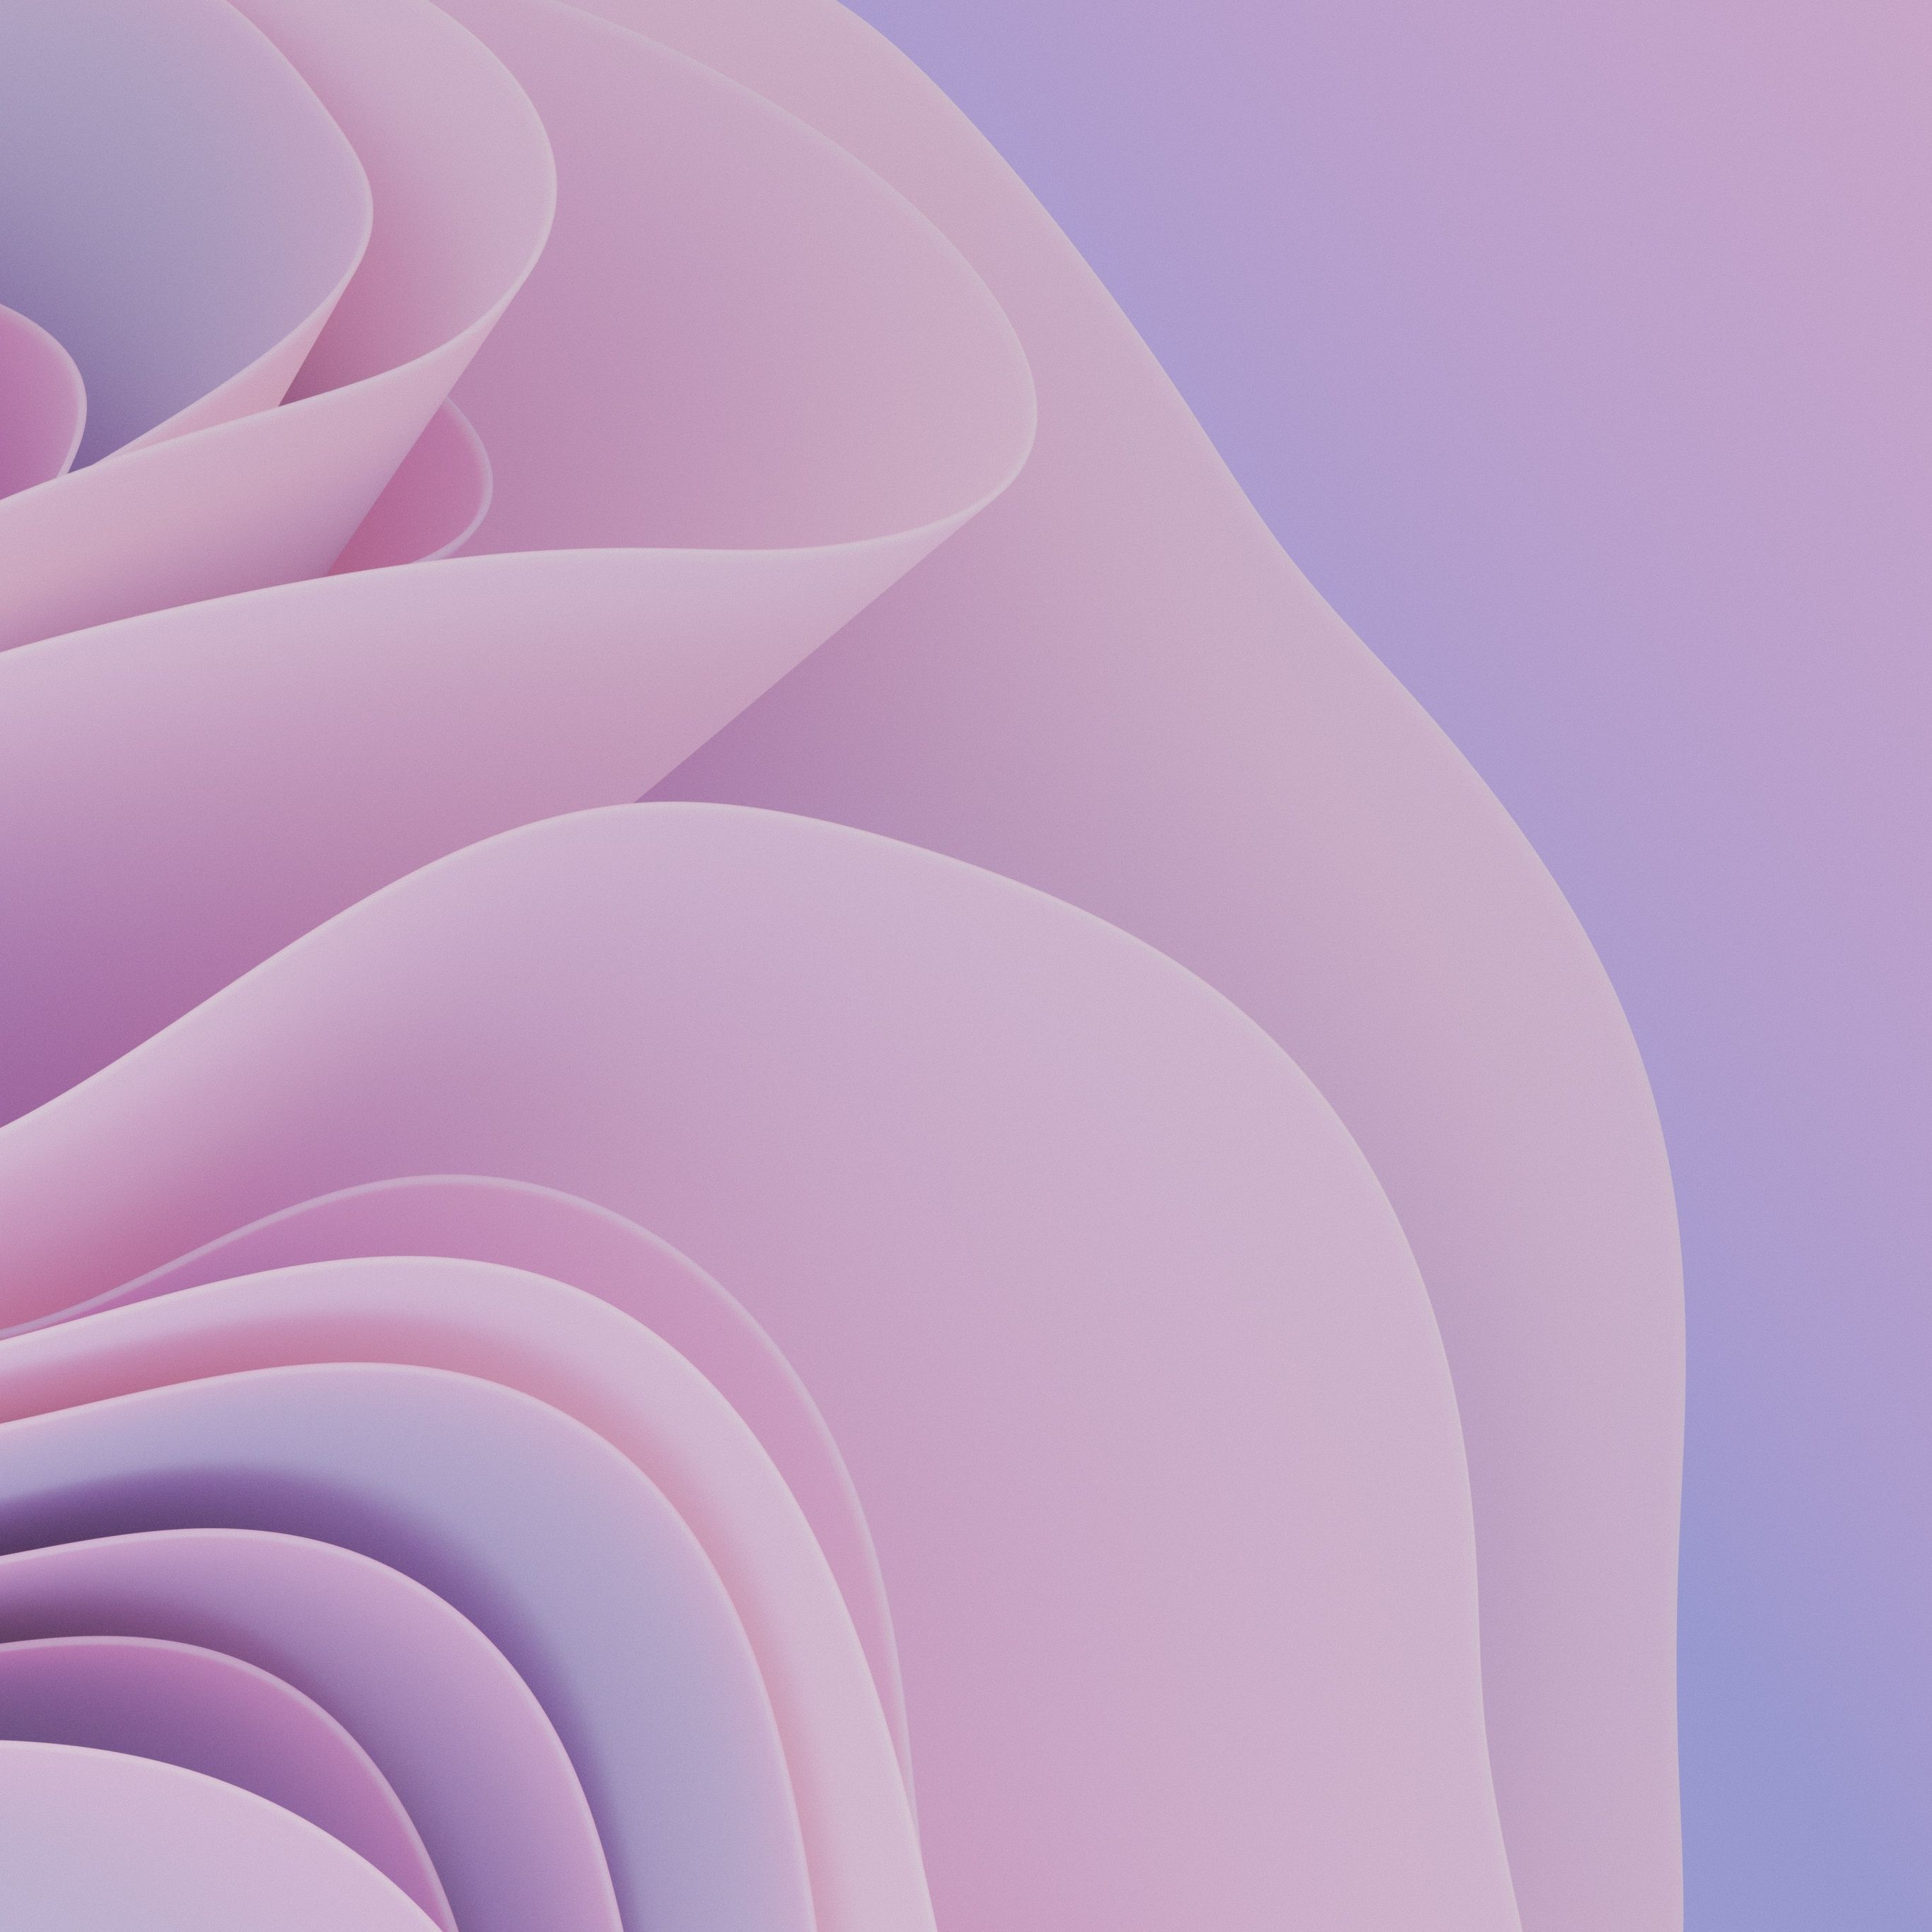 3D Render Wallpaper 4K, Waves, Girly, Abstract